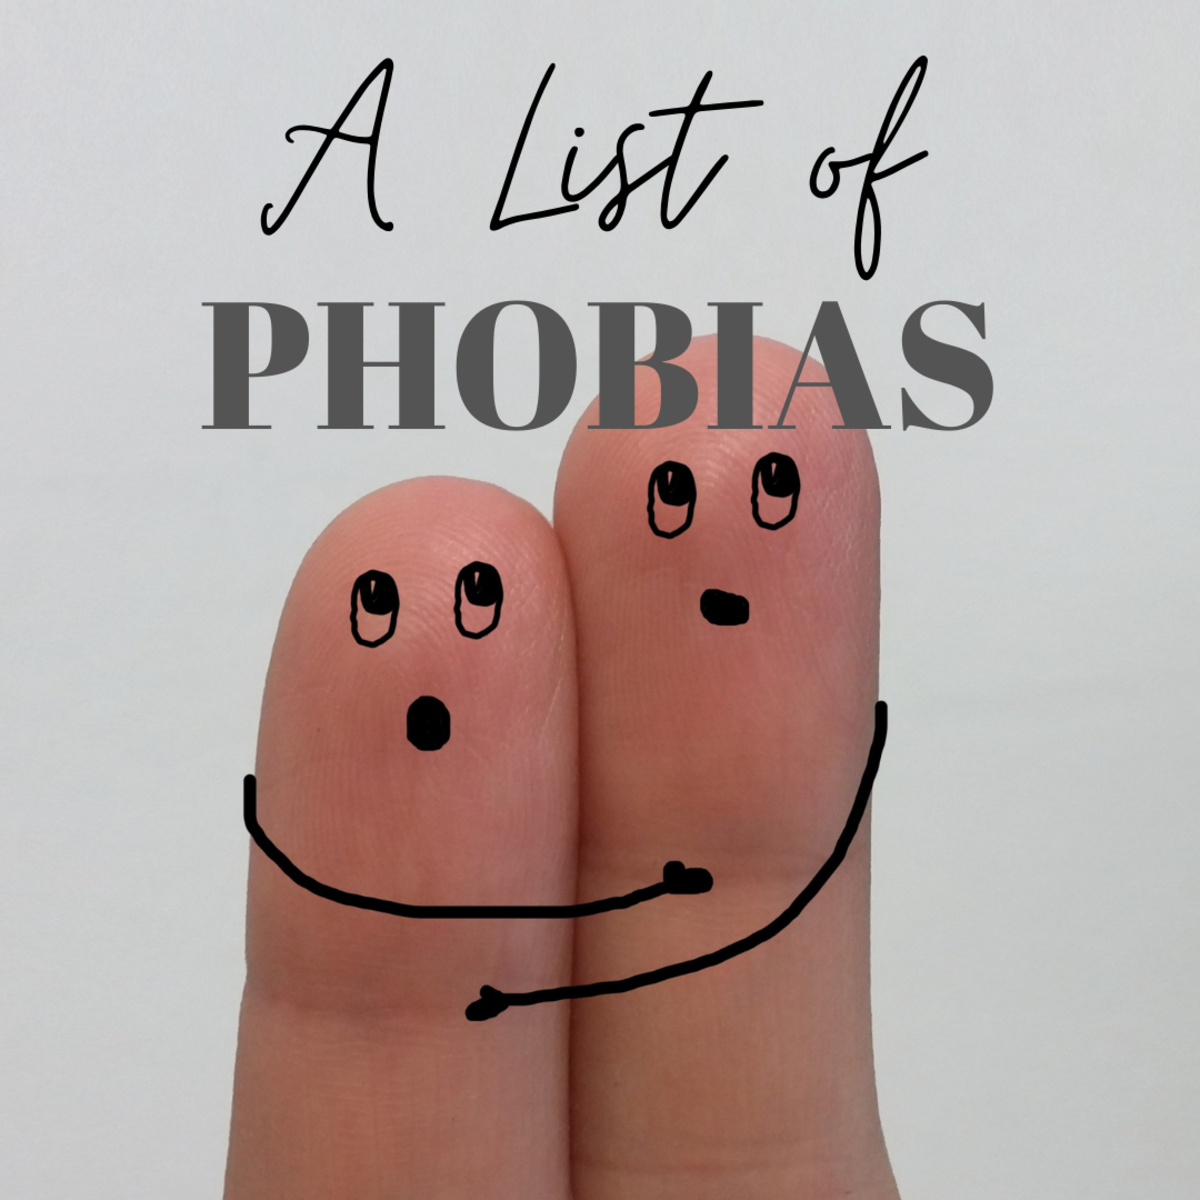 A list of common and uncommon phobias.